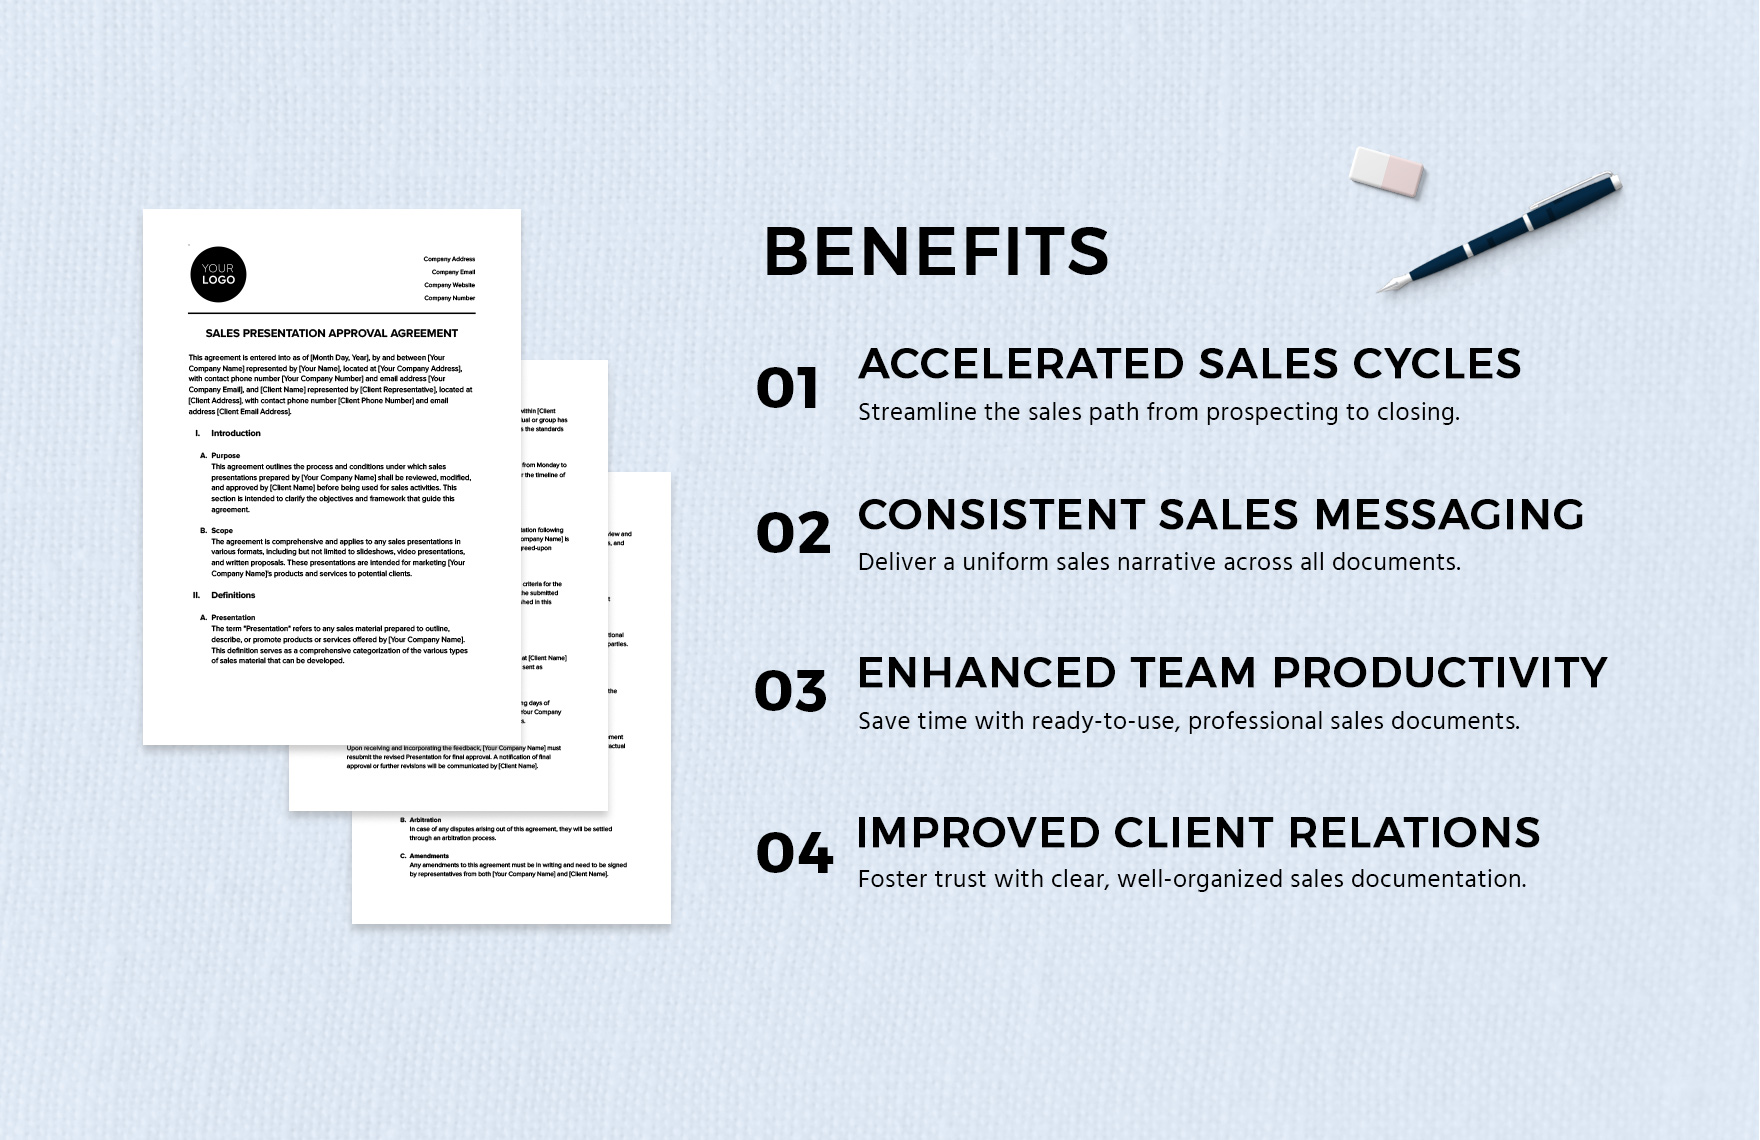  Sales Presentation Approval Agreement Template